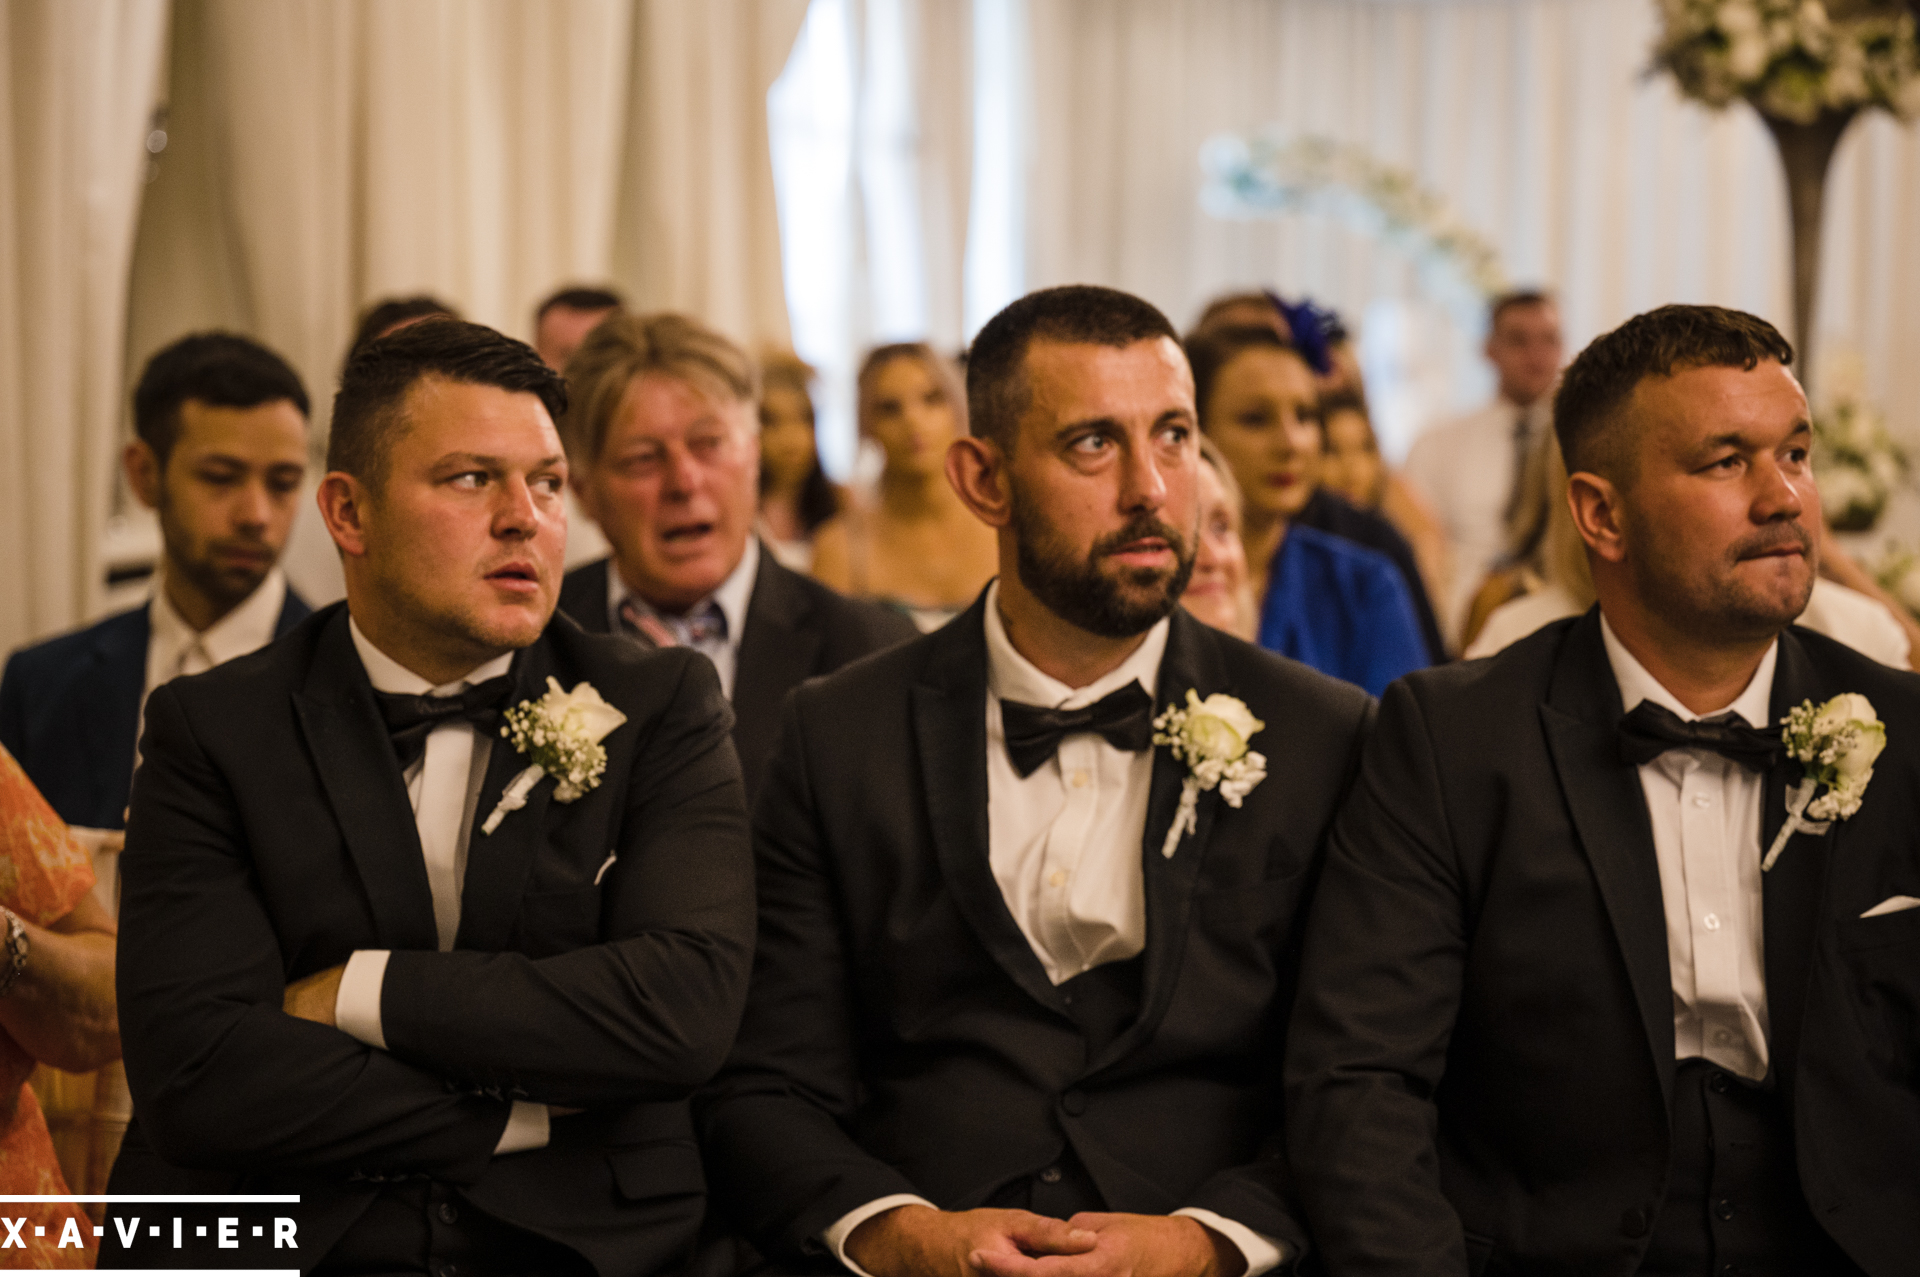 the groomsmen are sat together in the ceremony room